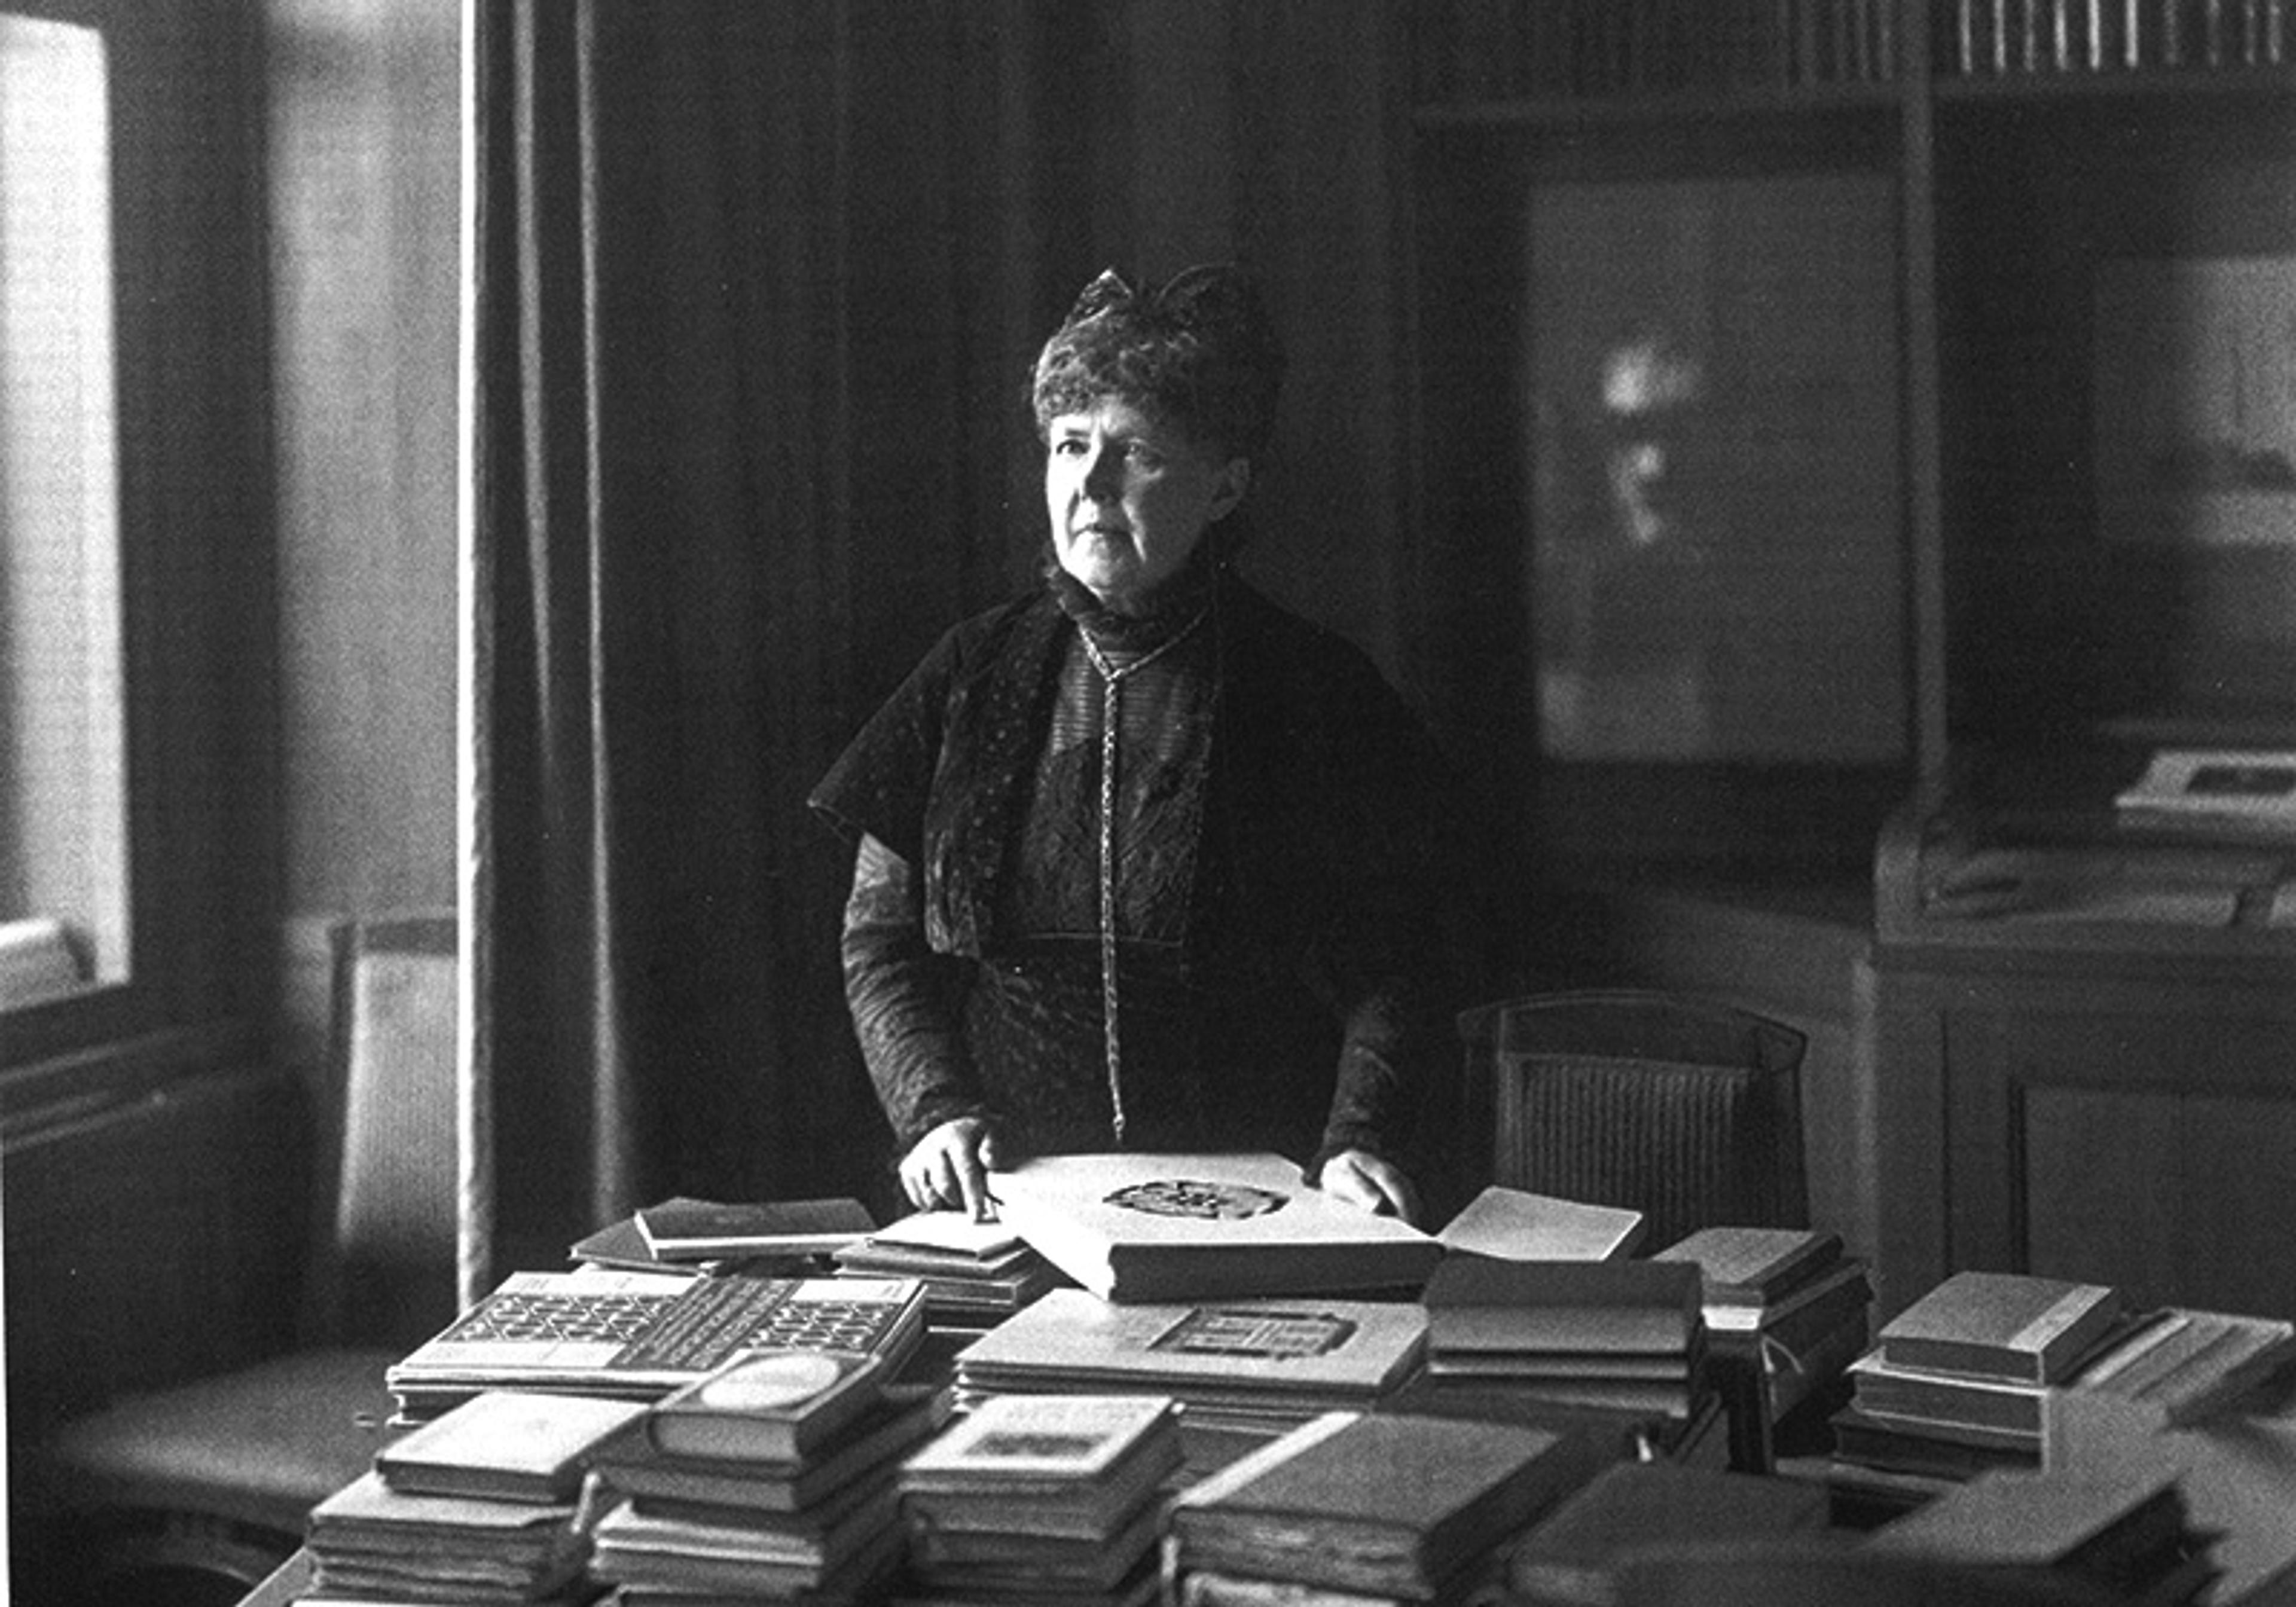 An elderly woman stands behind a desk filled with stacks of books in a dimly lit room, wearing a dark dress and looking towards a window.